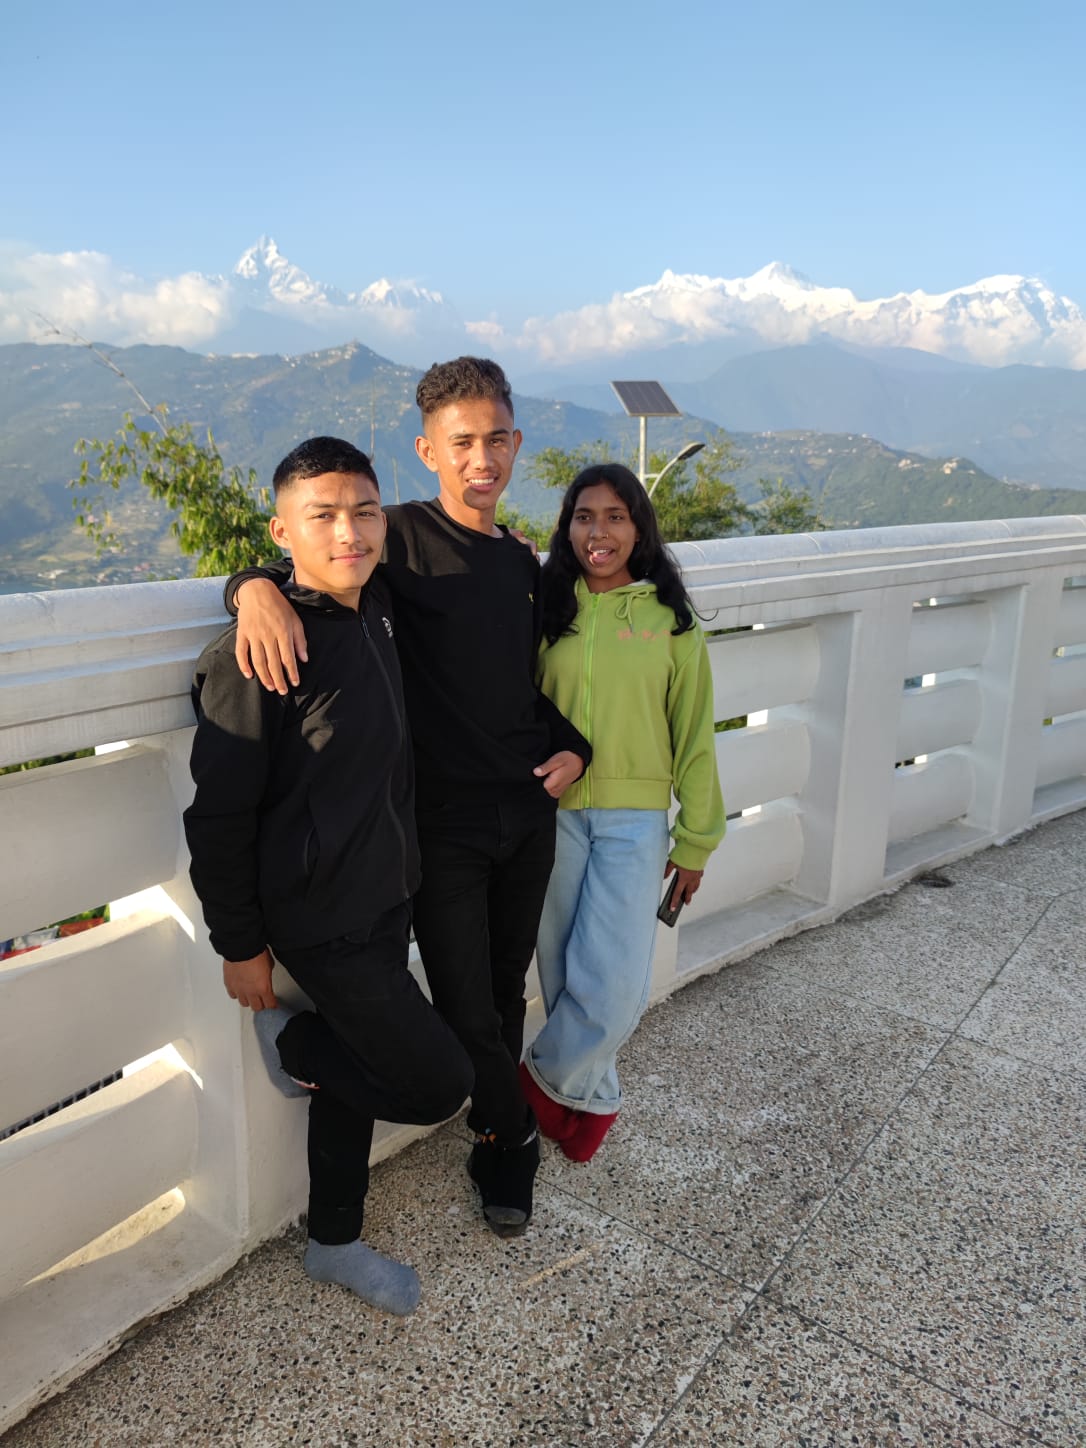 HORAC Nepal's Shining Stars Excel in SEE: Sponsorship Invited for College Studies